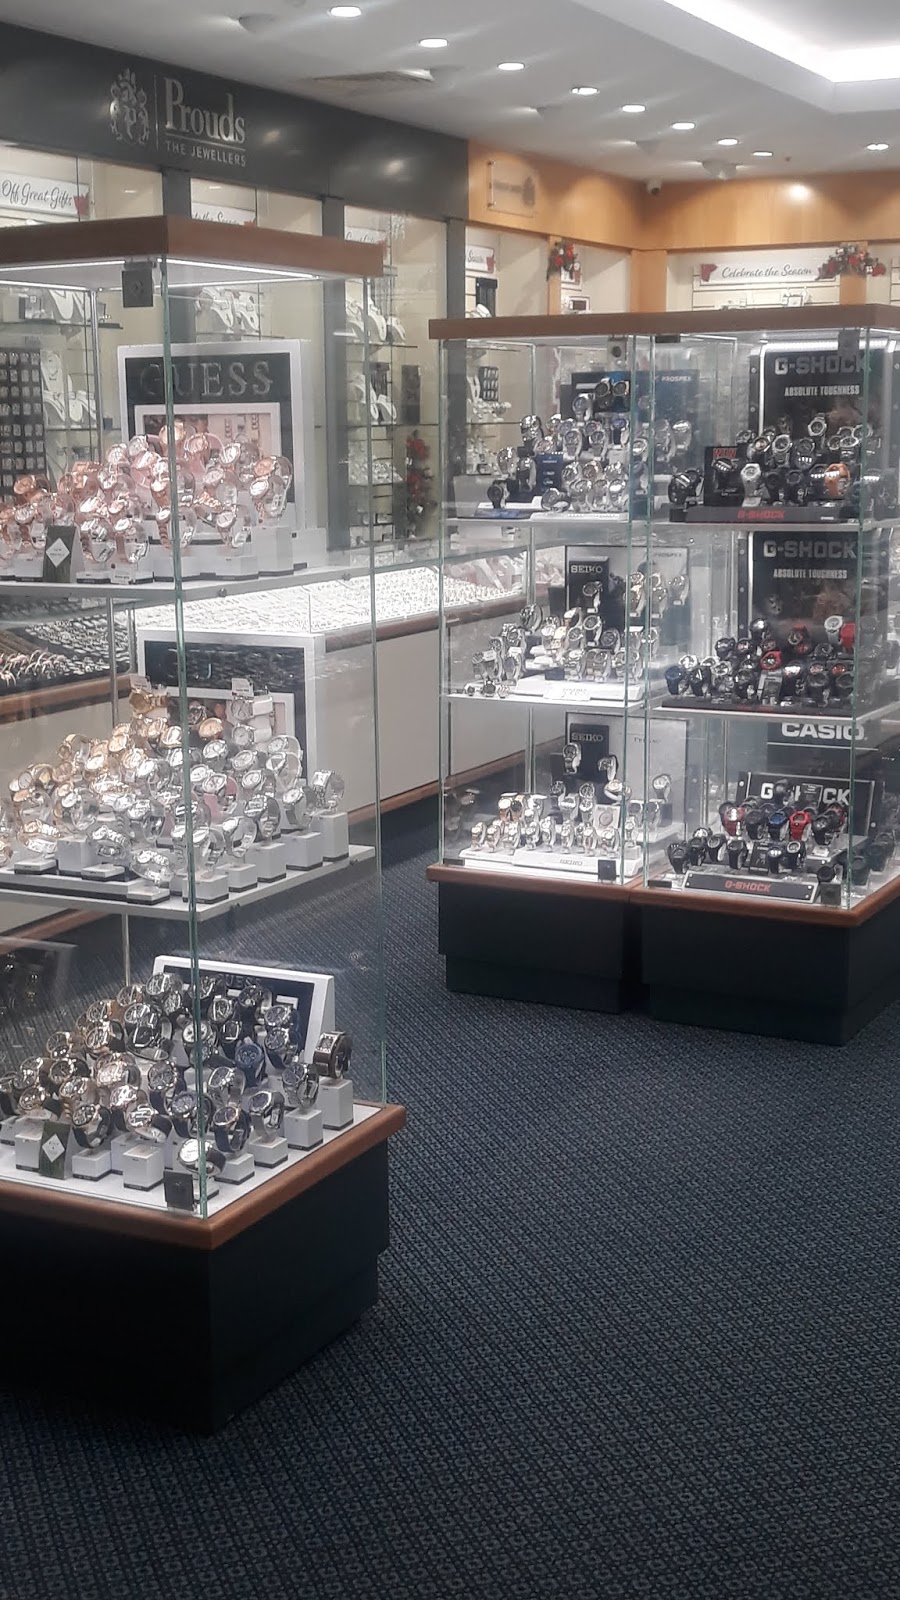 Prouds the Jewellers | jewelry store | Shop 242/100 Burwood Rd, Burwood NSW 2134, Australia | 0297456395 OR +61 2 9745 6395